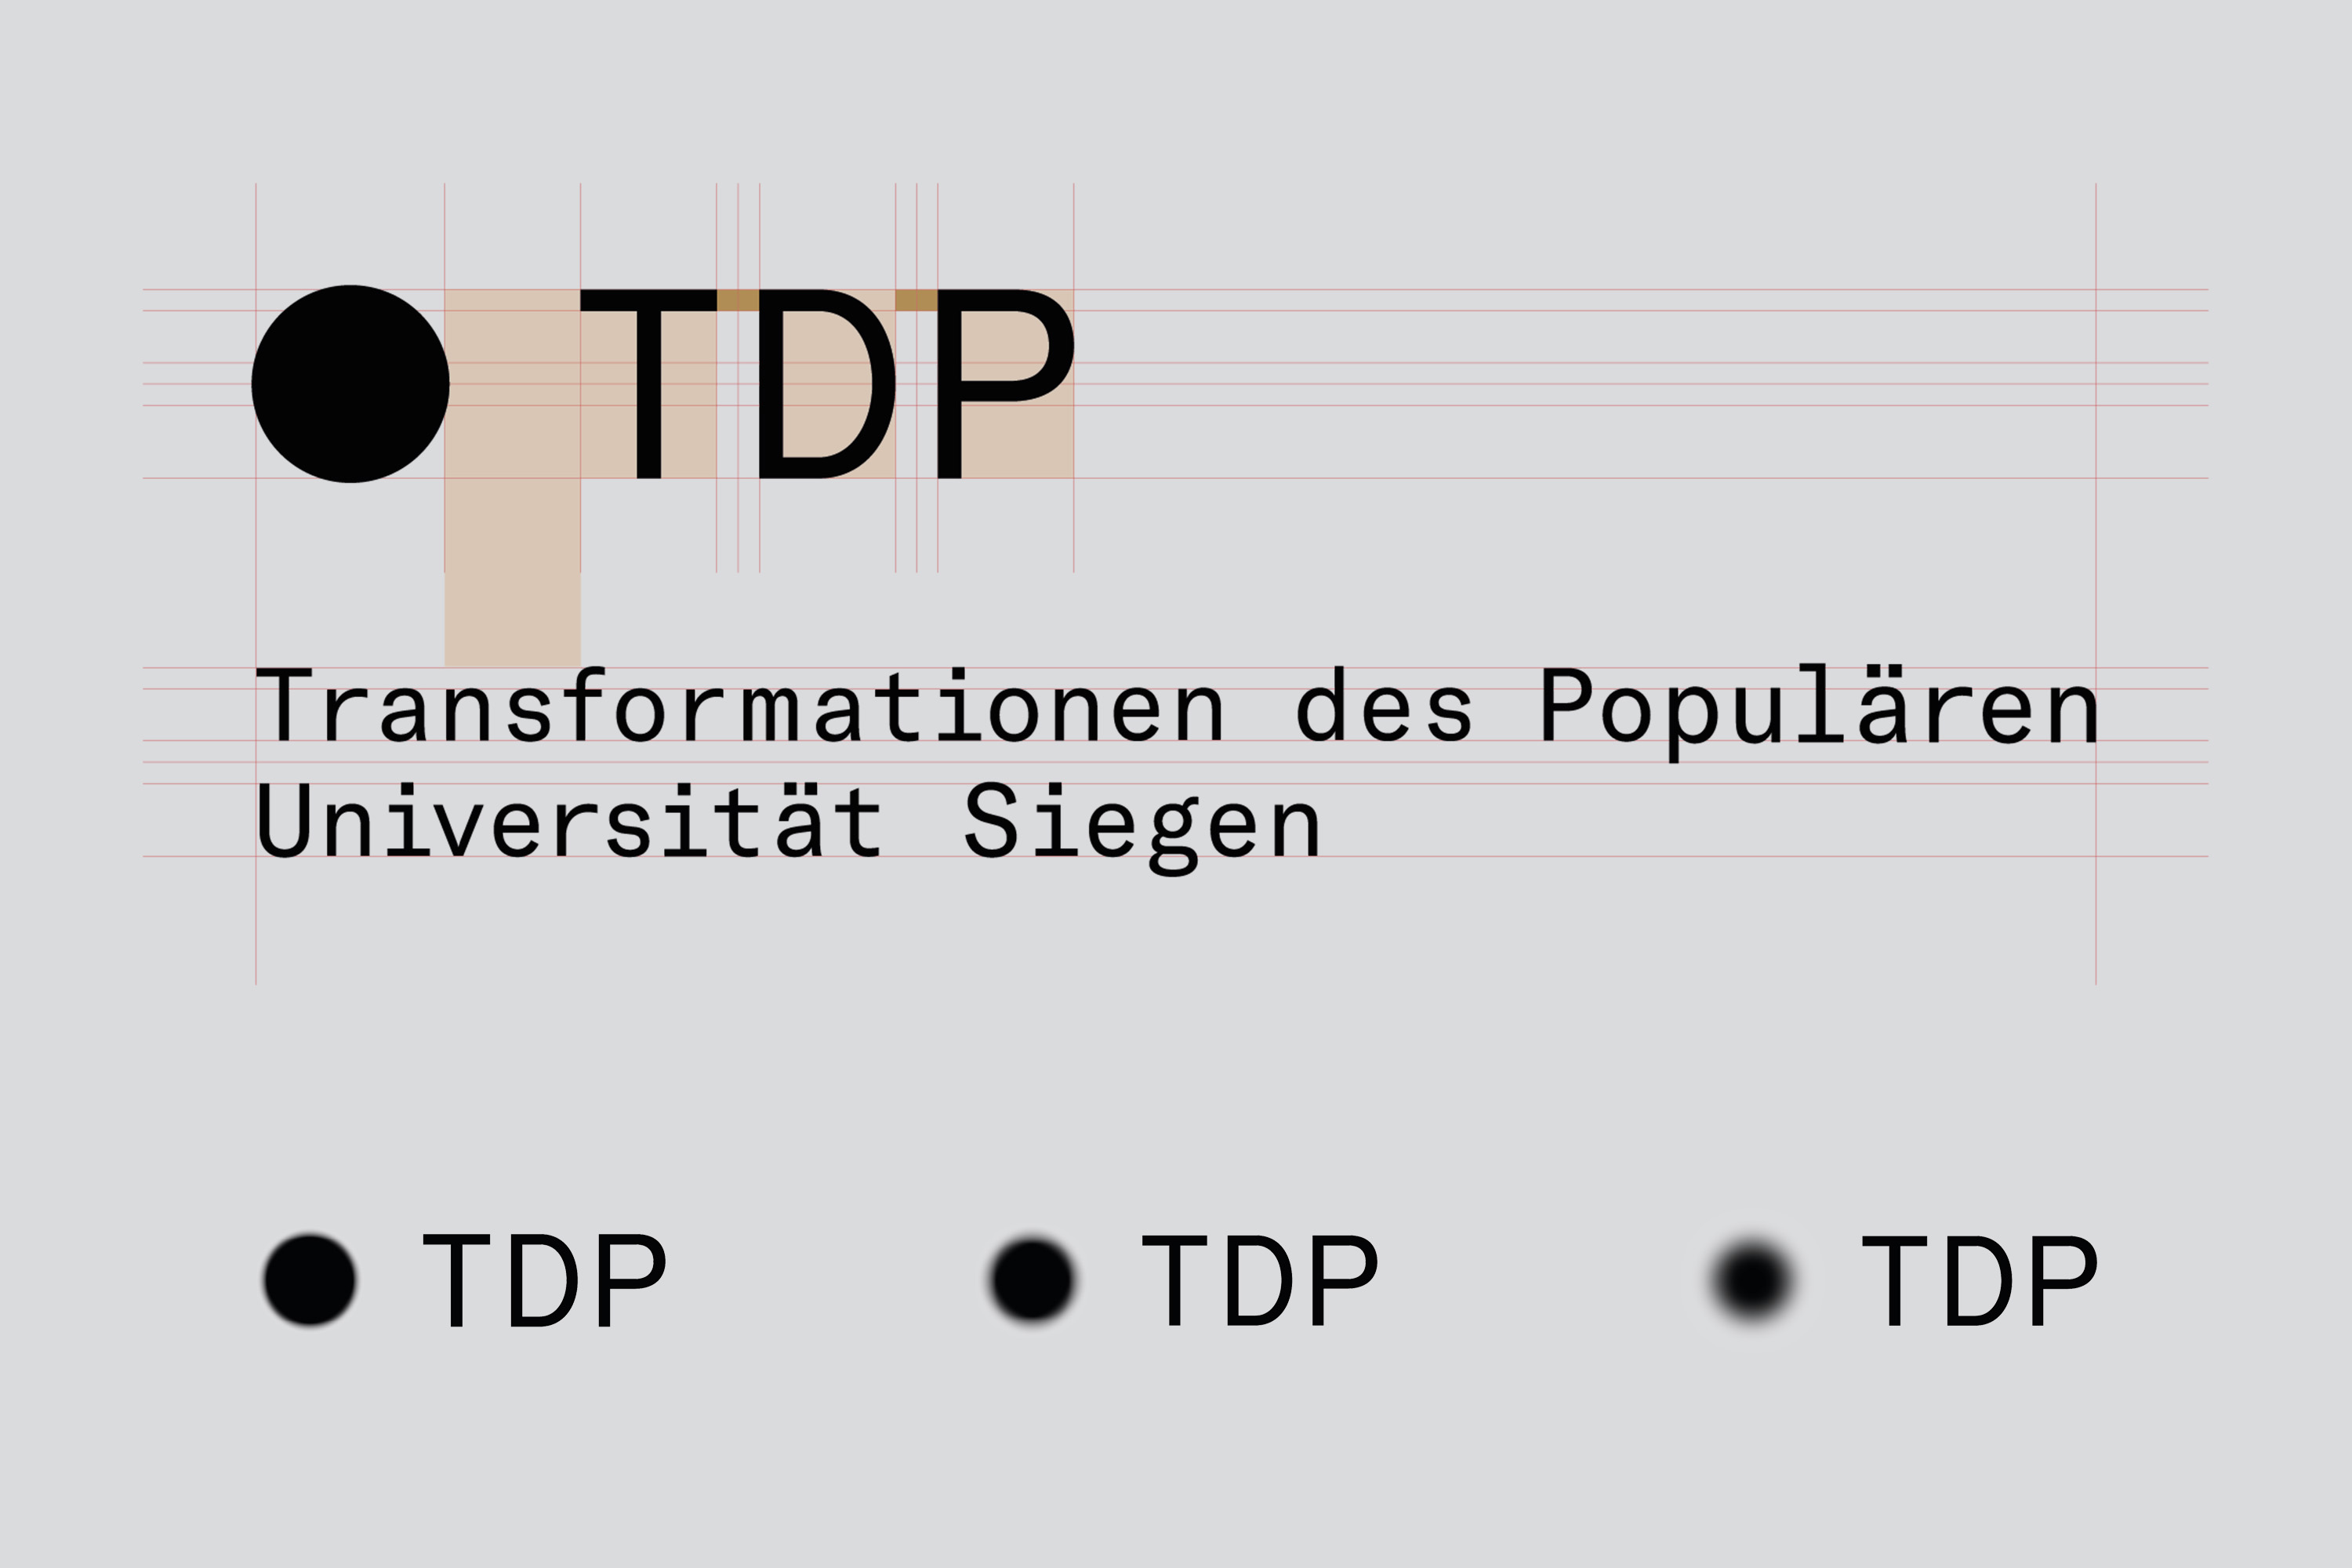 A visual representation of the designed versions for the TDP logo. On the top the main logo is a combination mark of logo symbol, monogram and wordmark shown in a grid. On the bottom 3 simplified versions of the logo are shown.